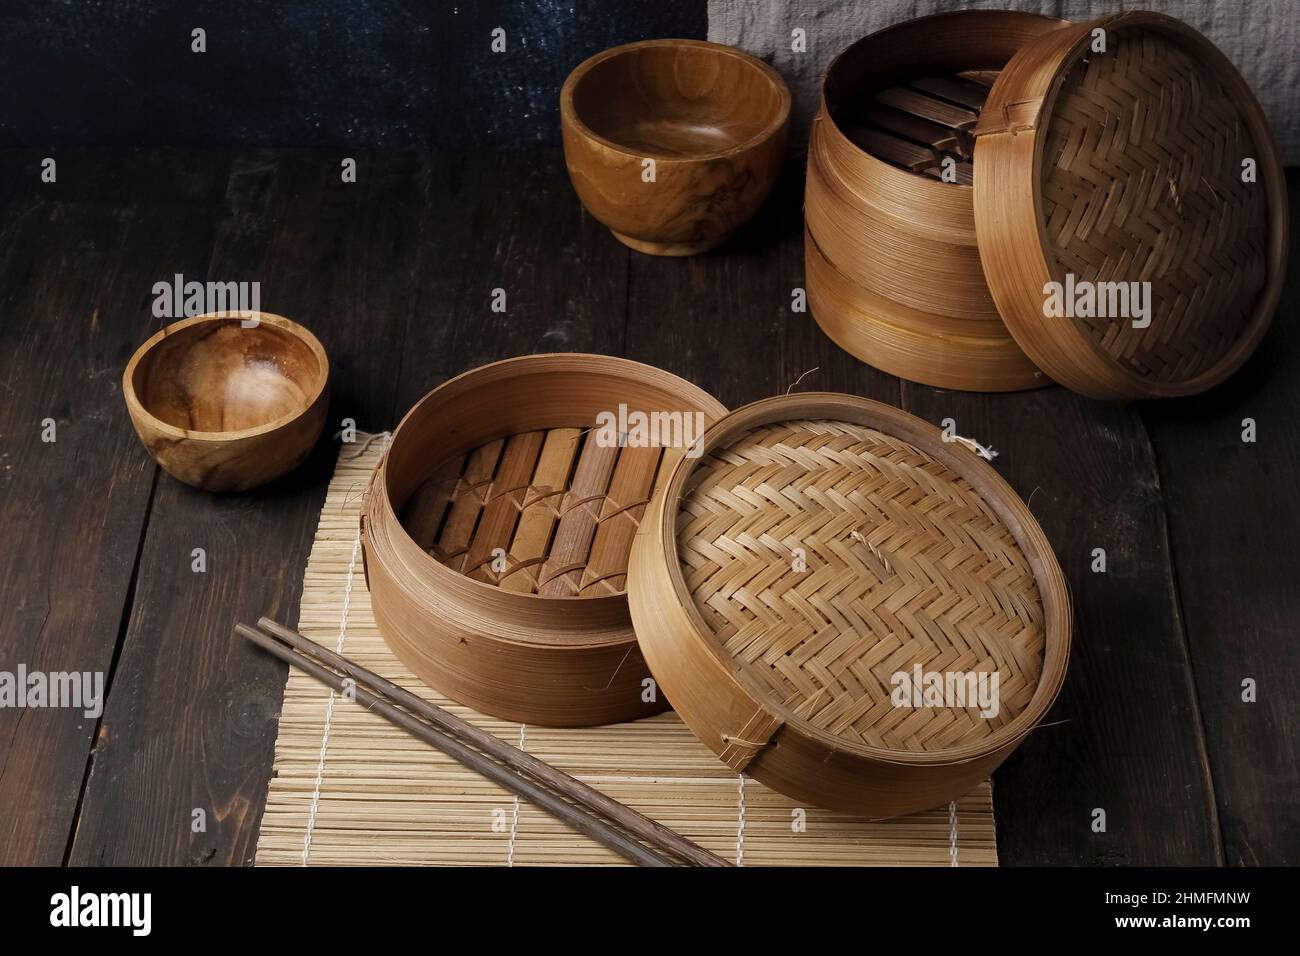 dimsum basket bamboo steamer and chopstick, wooden bowel on wooden table Stock Photo